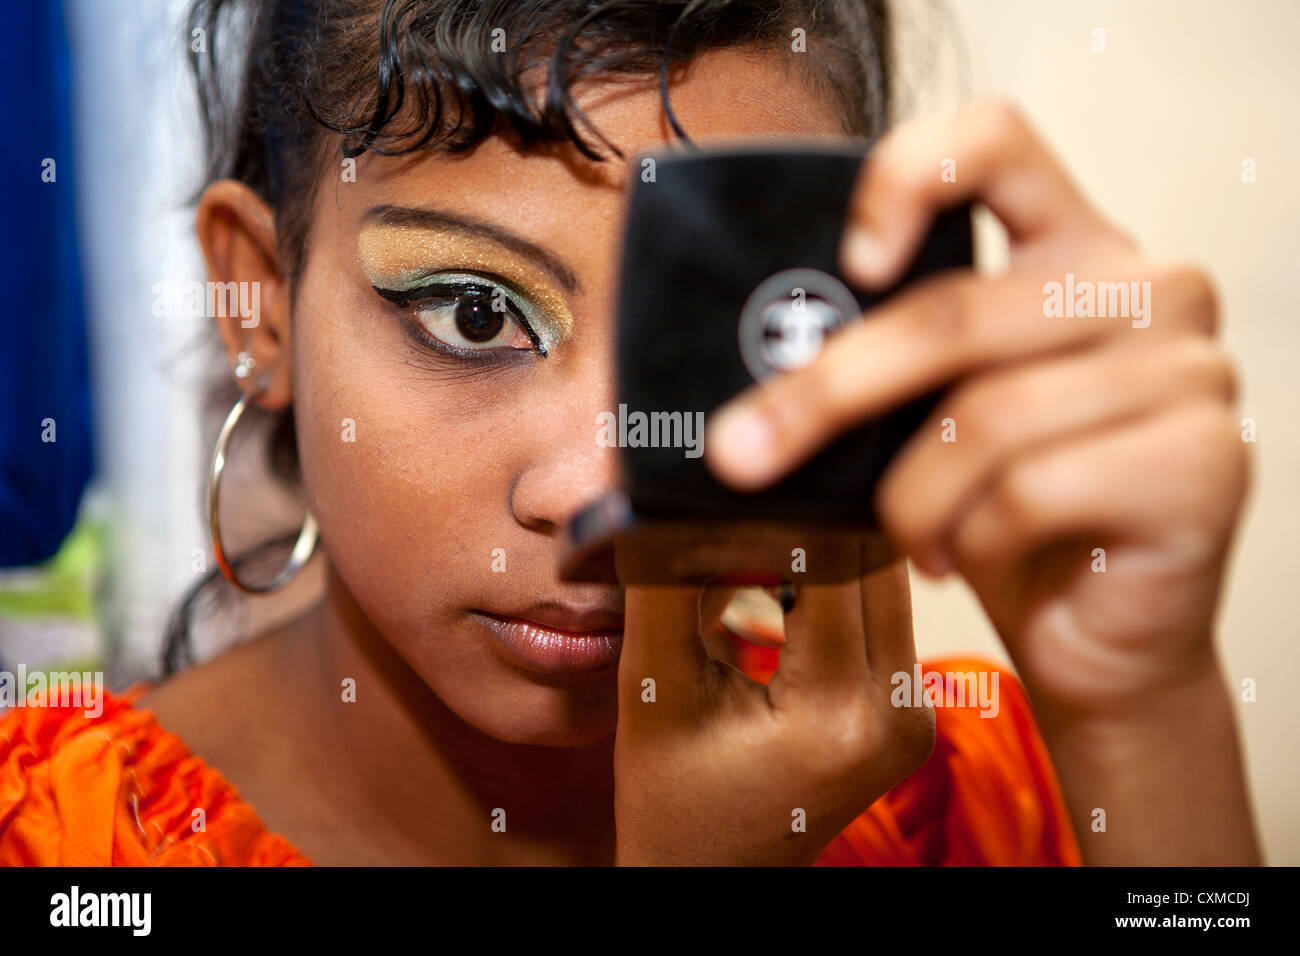 Sega dancer applying make-up before a performance at the One&Only Le Saint Géran resort, Mauritius Stock Photo